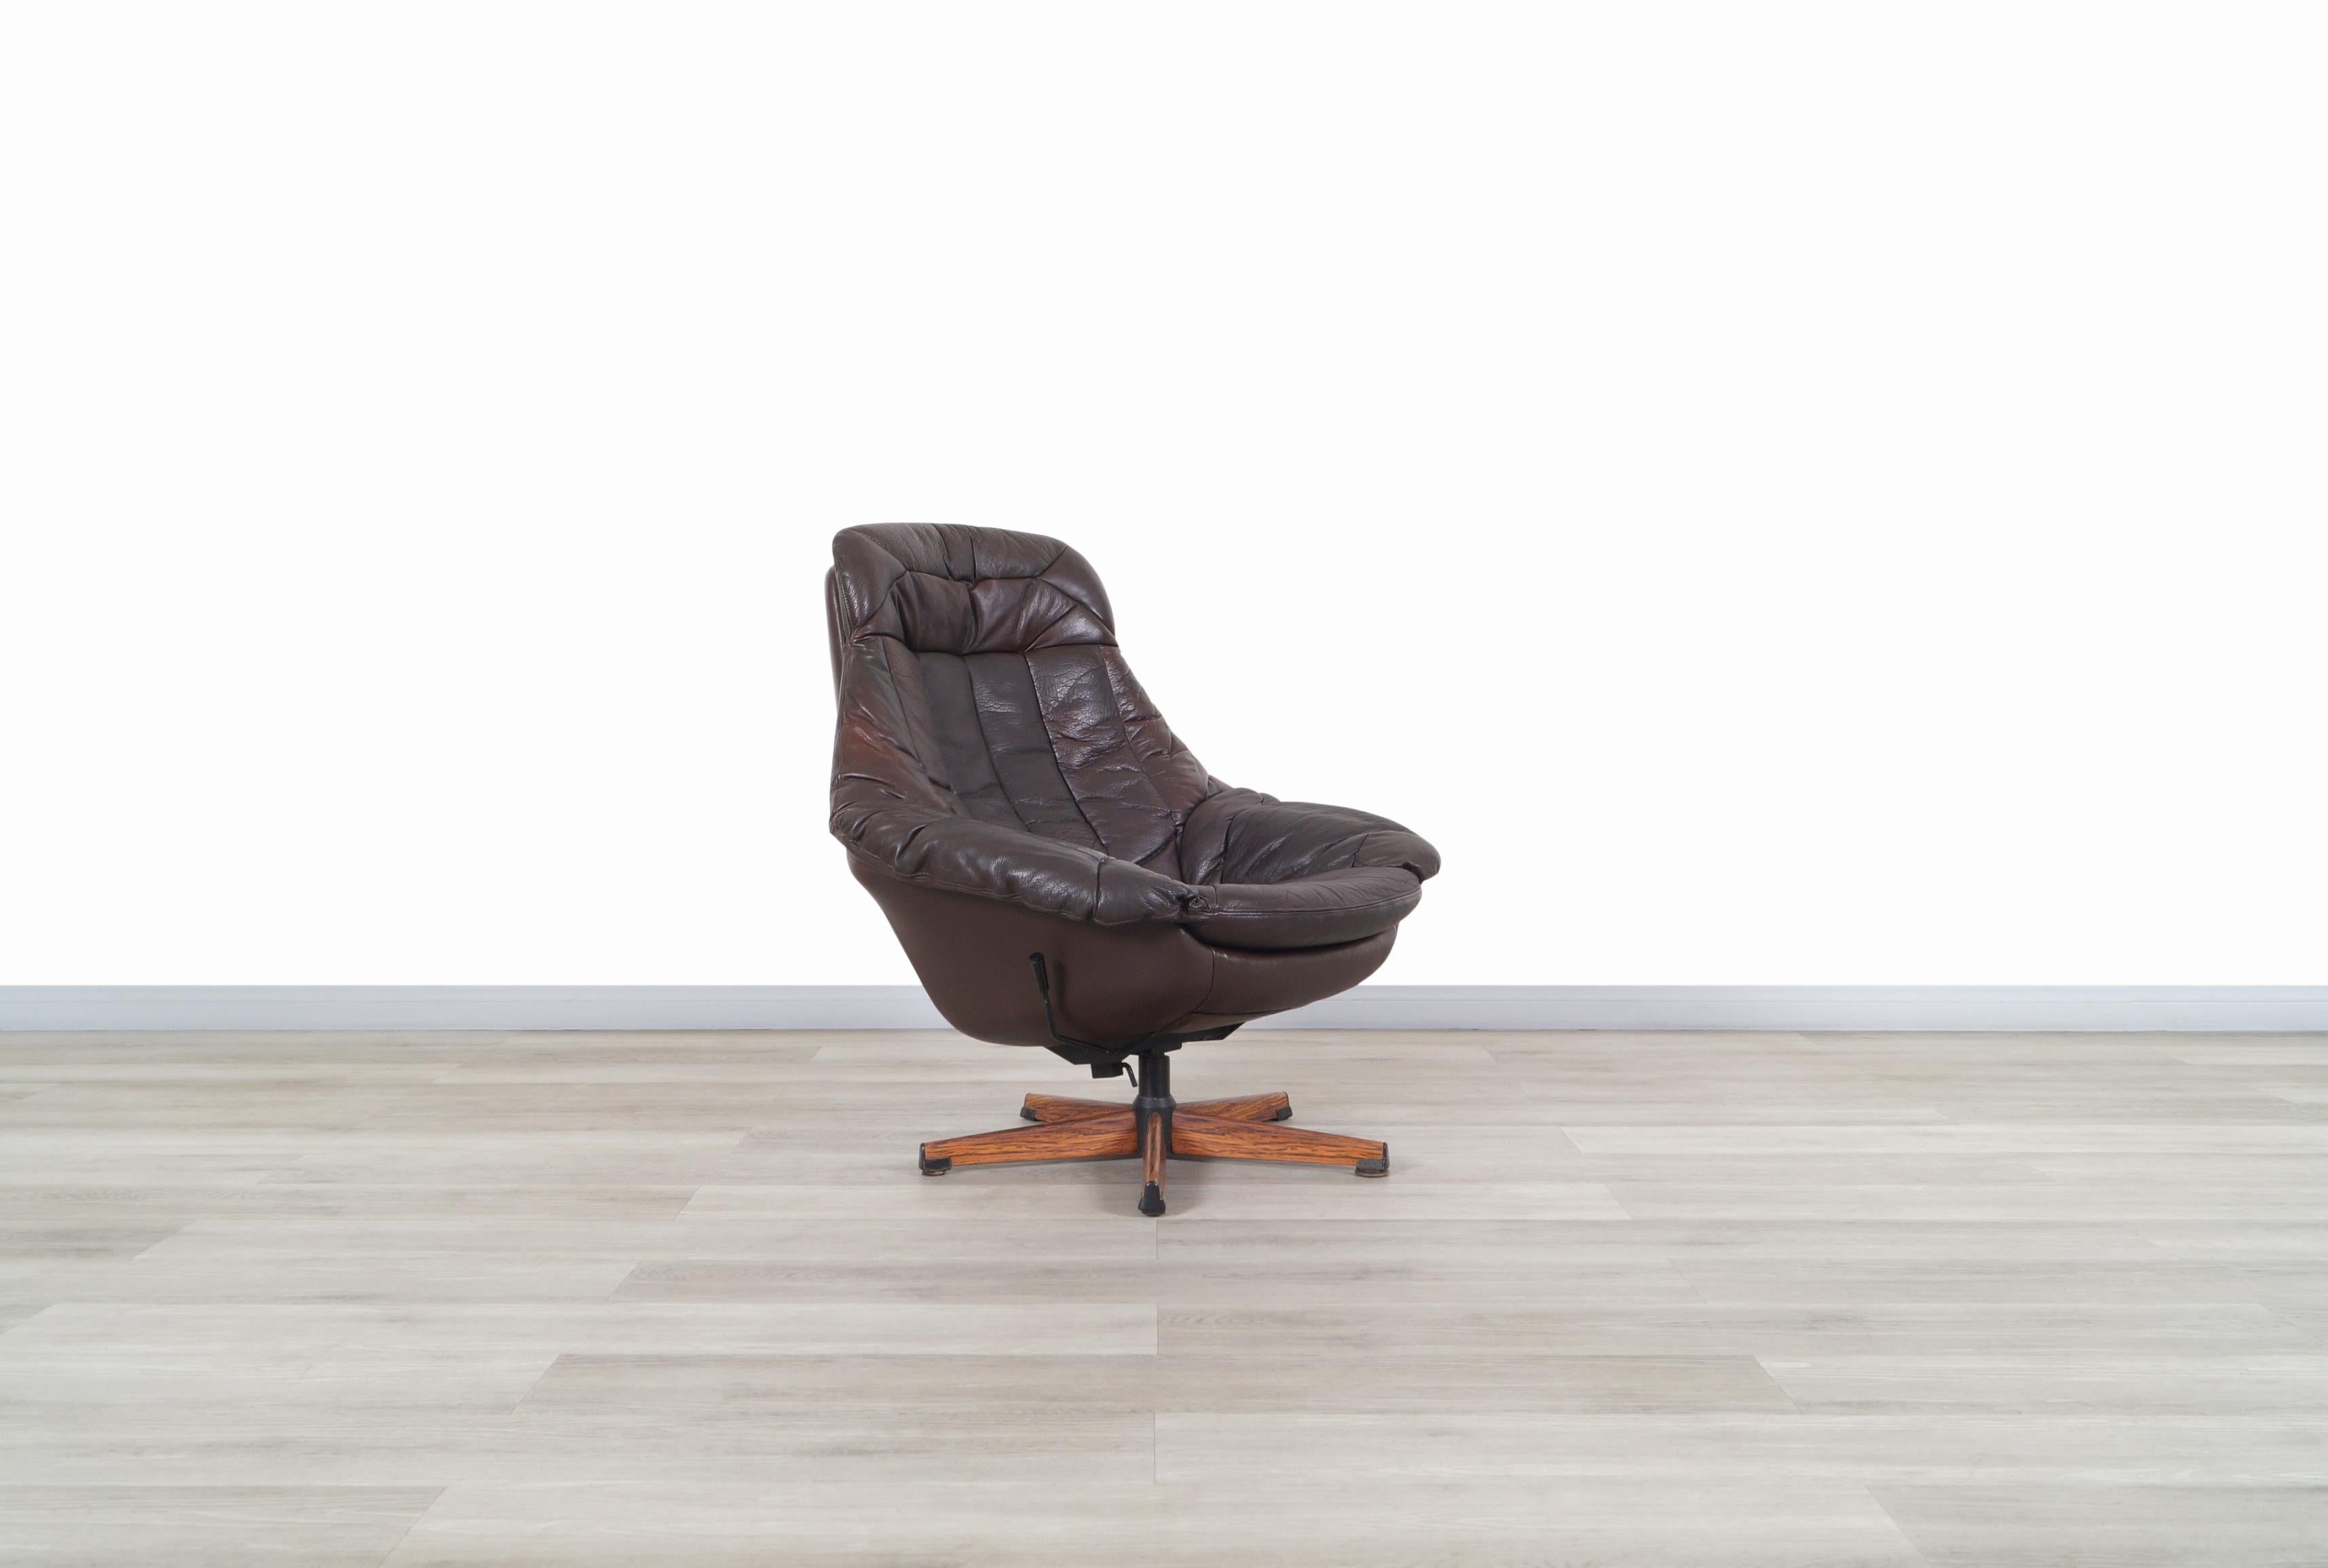 Beautiful vintage leather reclining swivel lounge chair designed by H.W. Klein for Bramin in Denmark, circa 1960s. Feature an ergonomic design that provides better relaxation when sitting. The chair is covered by original dark brown leather that is